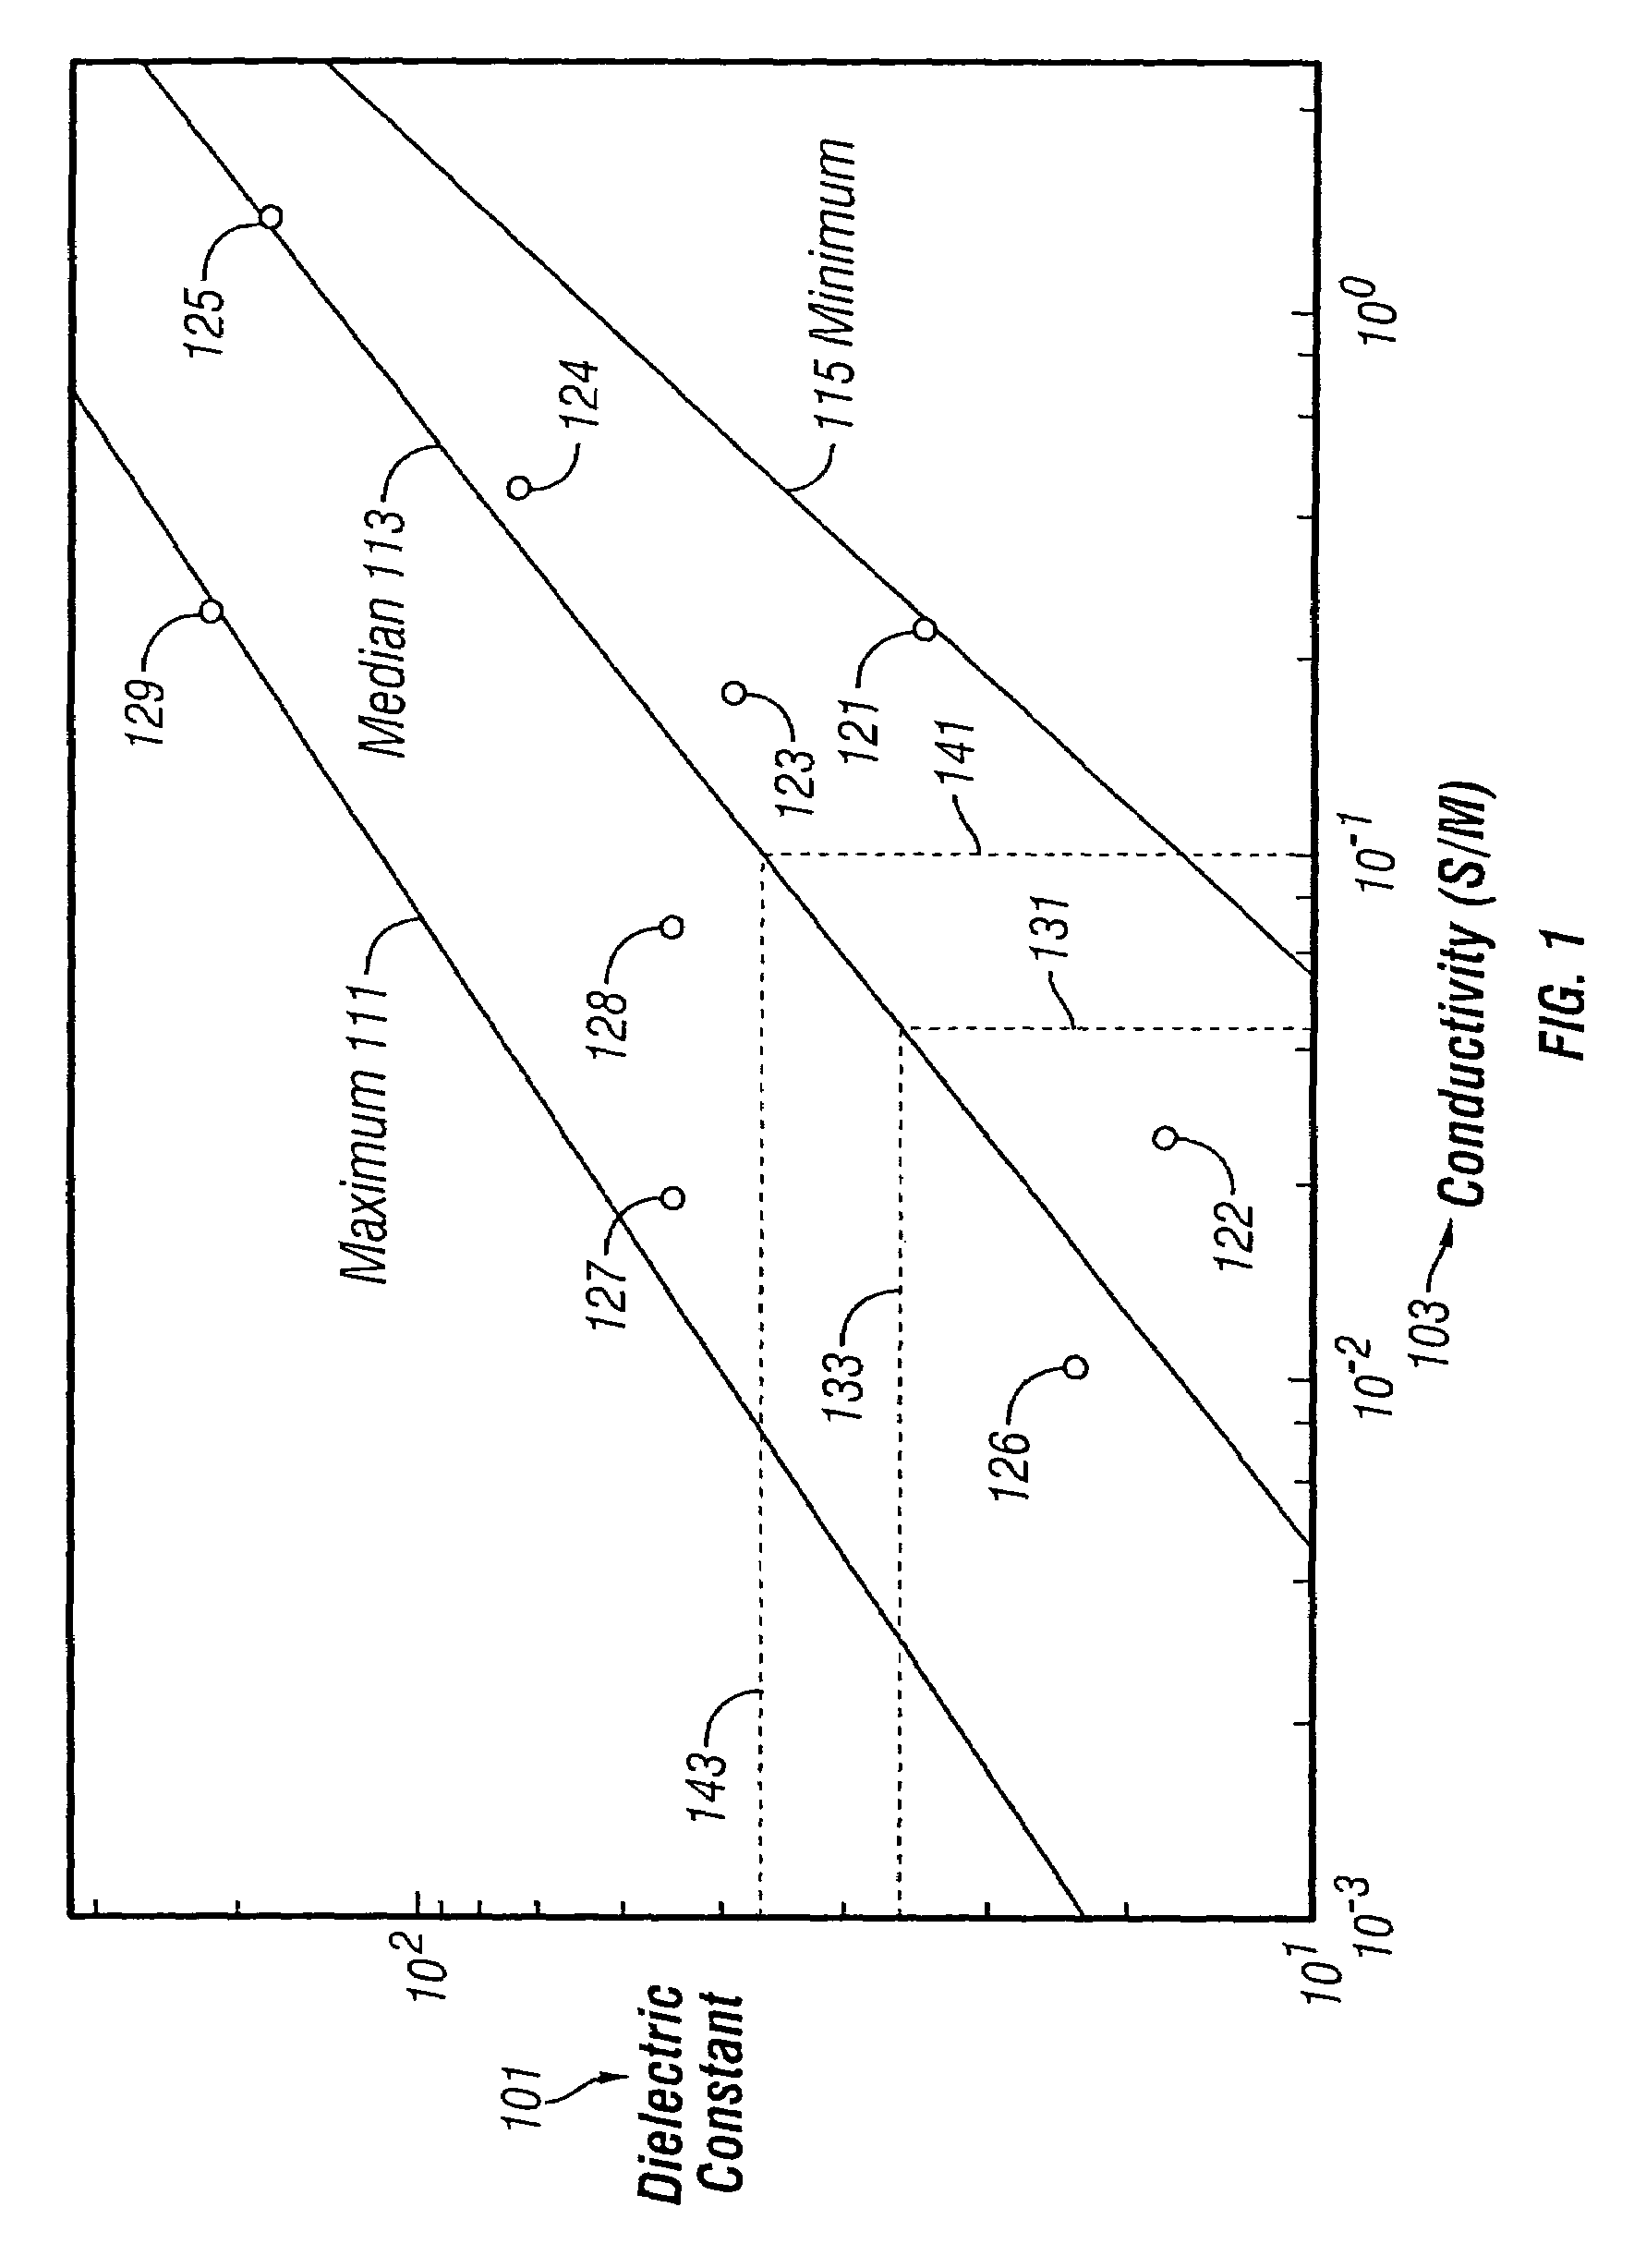 Method of estimating electrical parameters of an earth formation with a simplified measurement device model